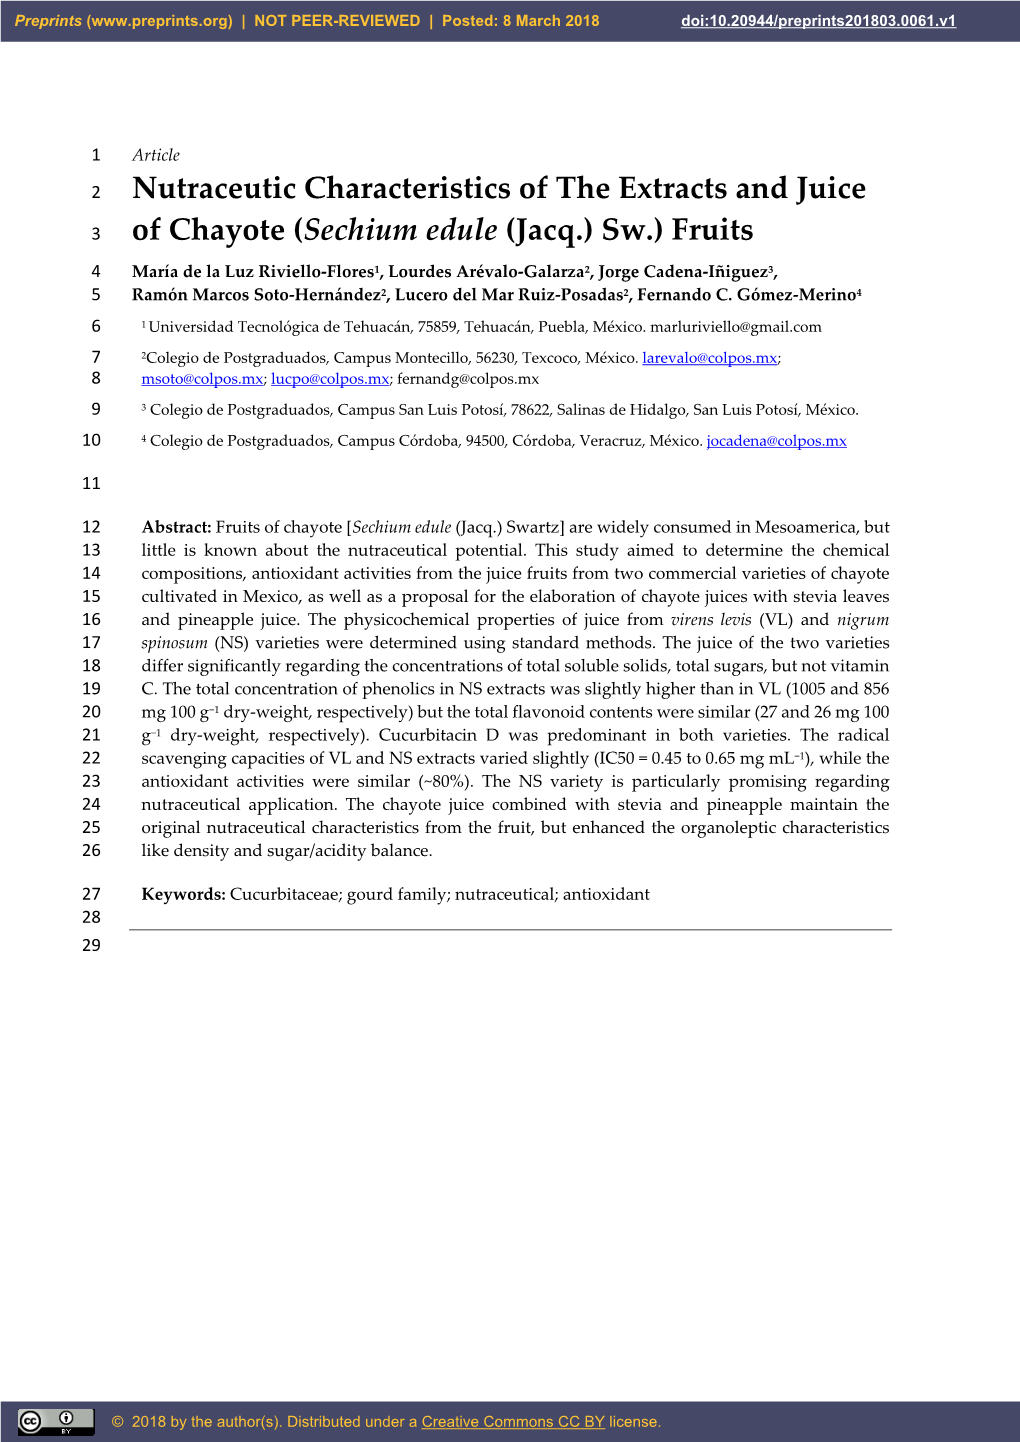 Nutraceutic Characteristics of the Extracts and Juice of Chayote